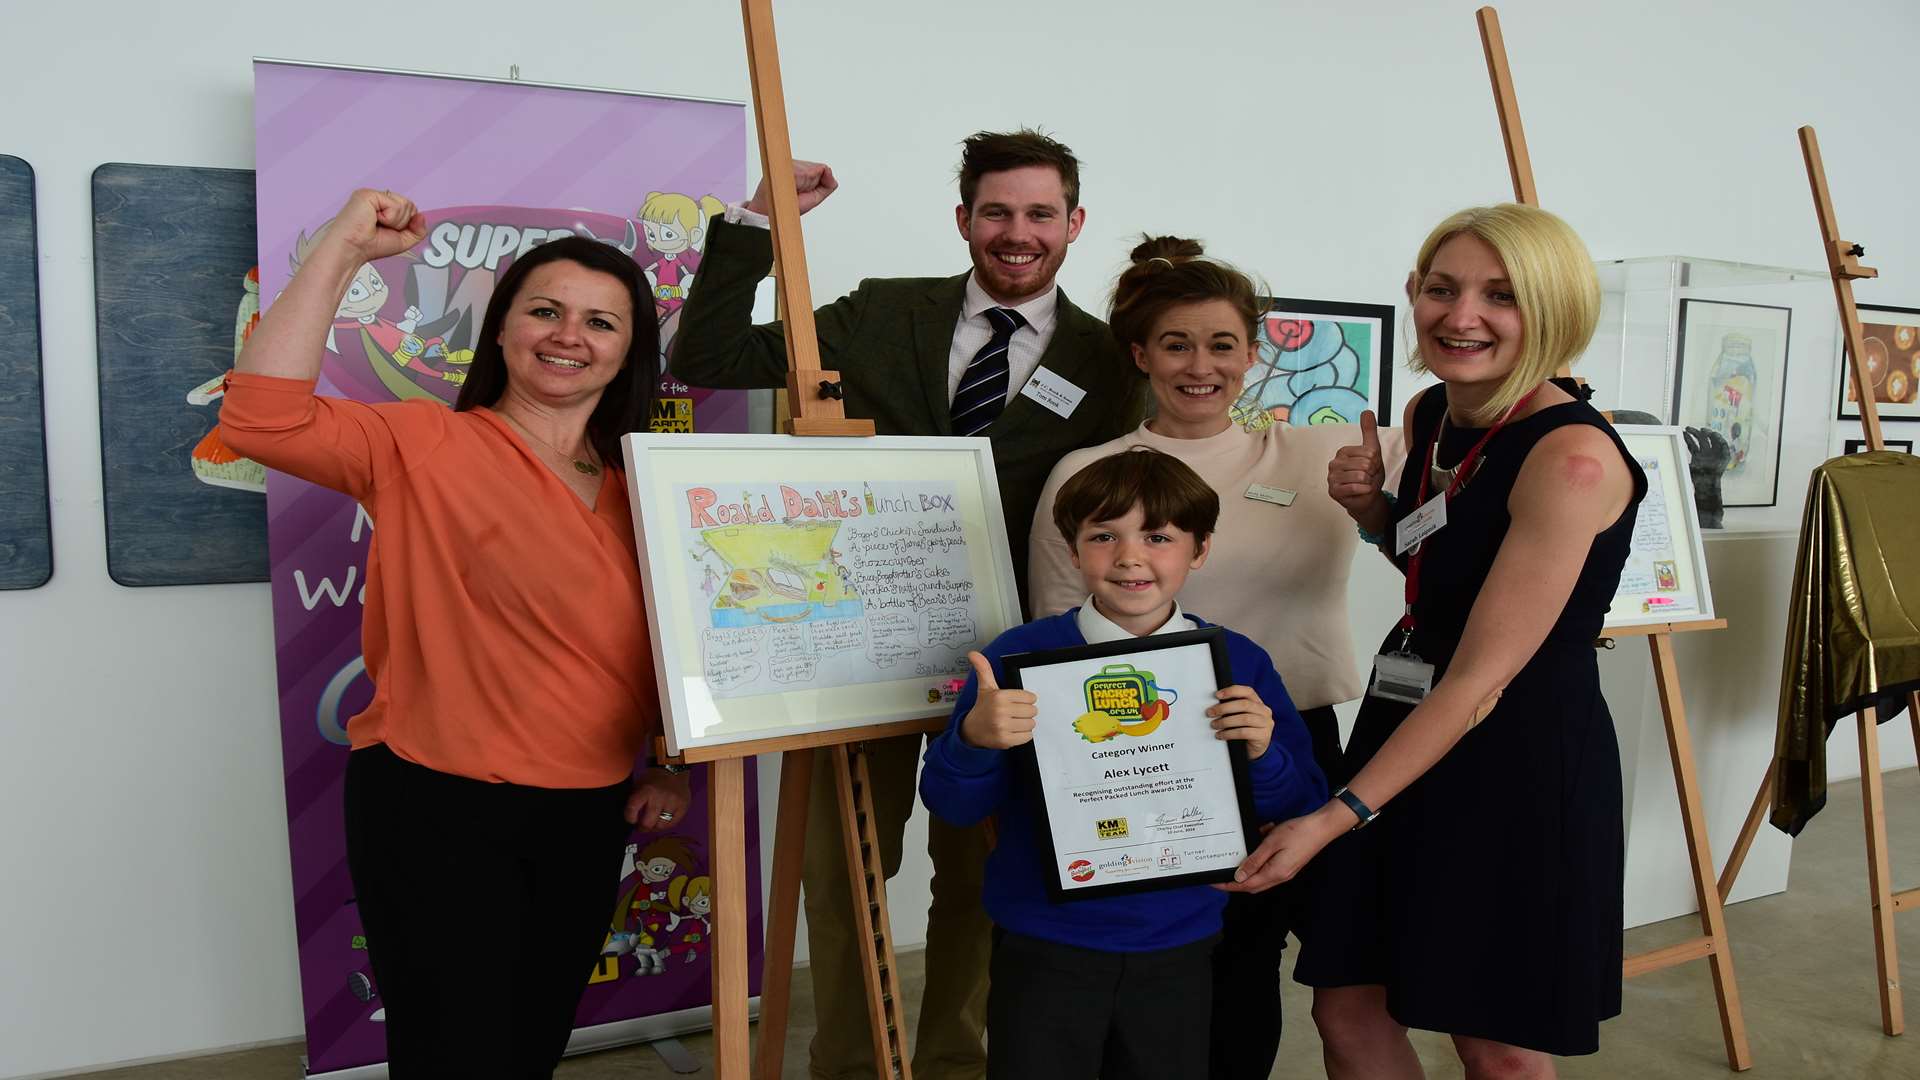 Perfect Packed Lunch Awards at Turner Gallery. Overall Champion Alex Lycett of Sheldwich Primary School celebrates victory with key partners at the 2016 event.